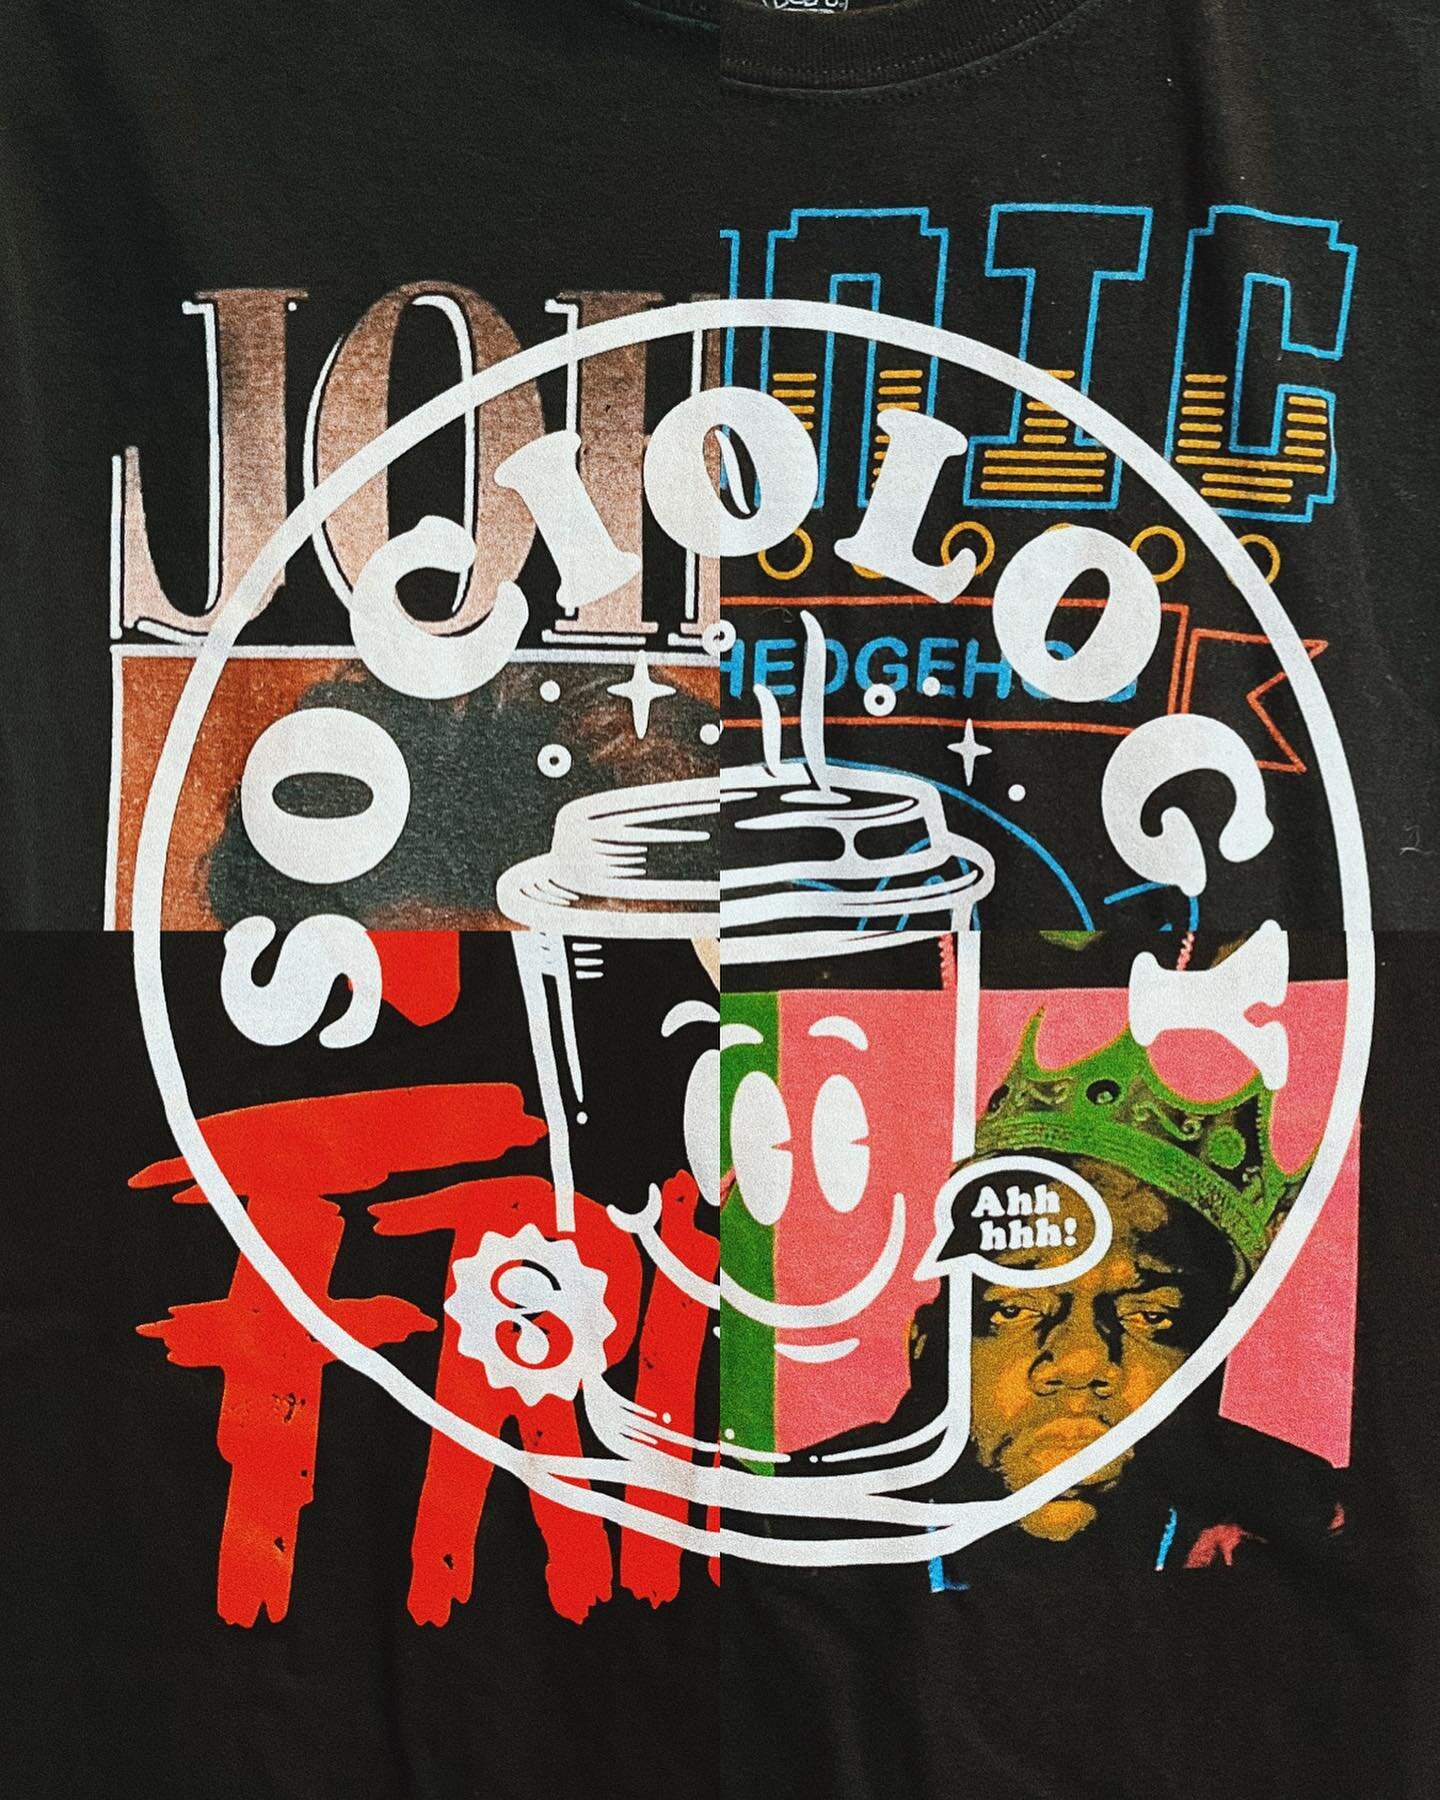 What if I told you...🤔😯

We thoughtfully curated 50+ vintage tees and then augmented them with huge SPROEY stamps? 😵😵😵

Our latest merch drop is just that.

And it's strictly for those who GET IT:

You get the hard work of finding a great vintag